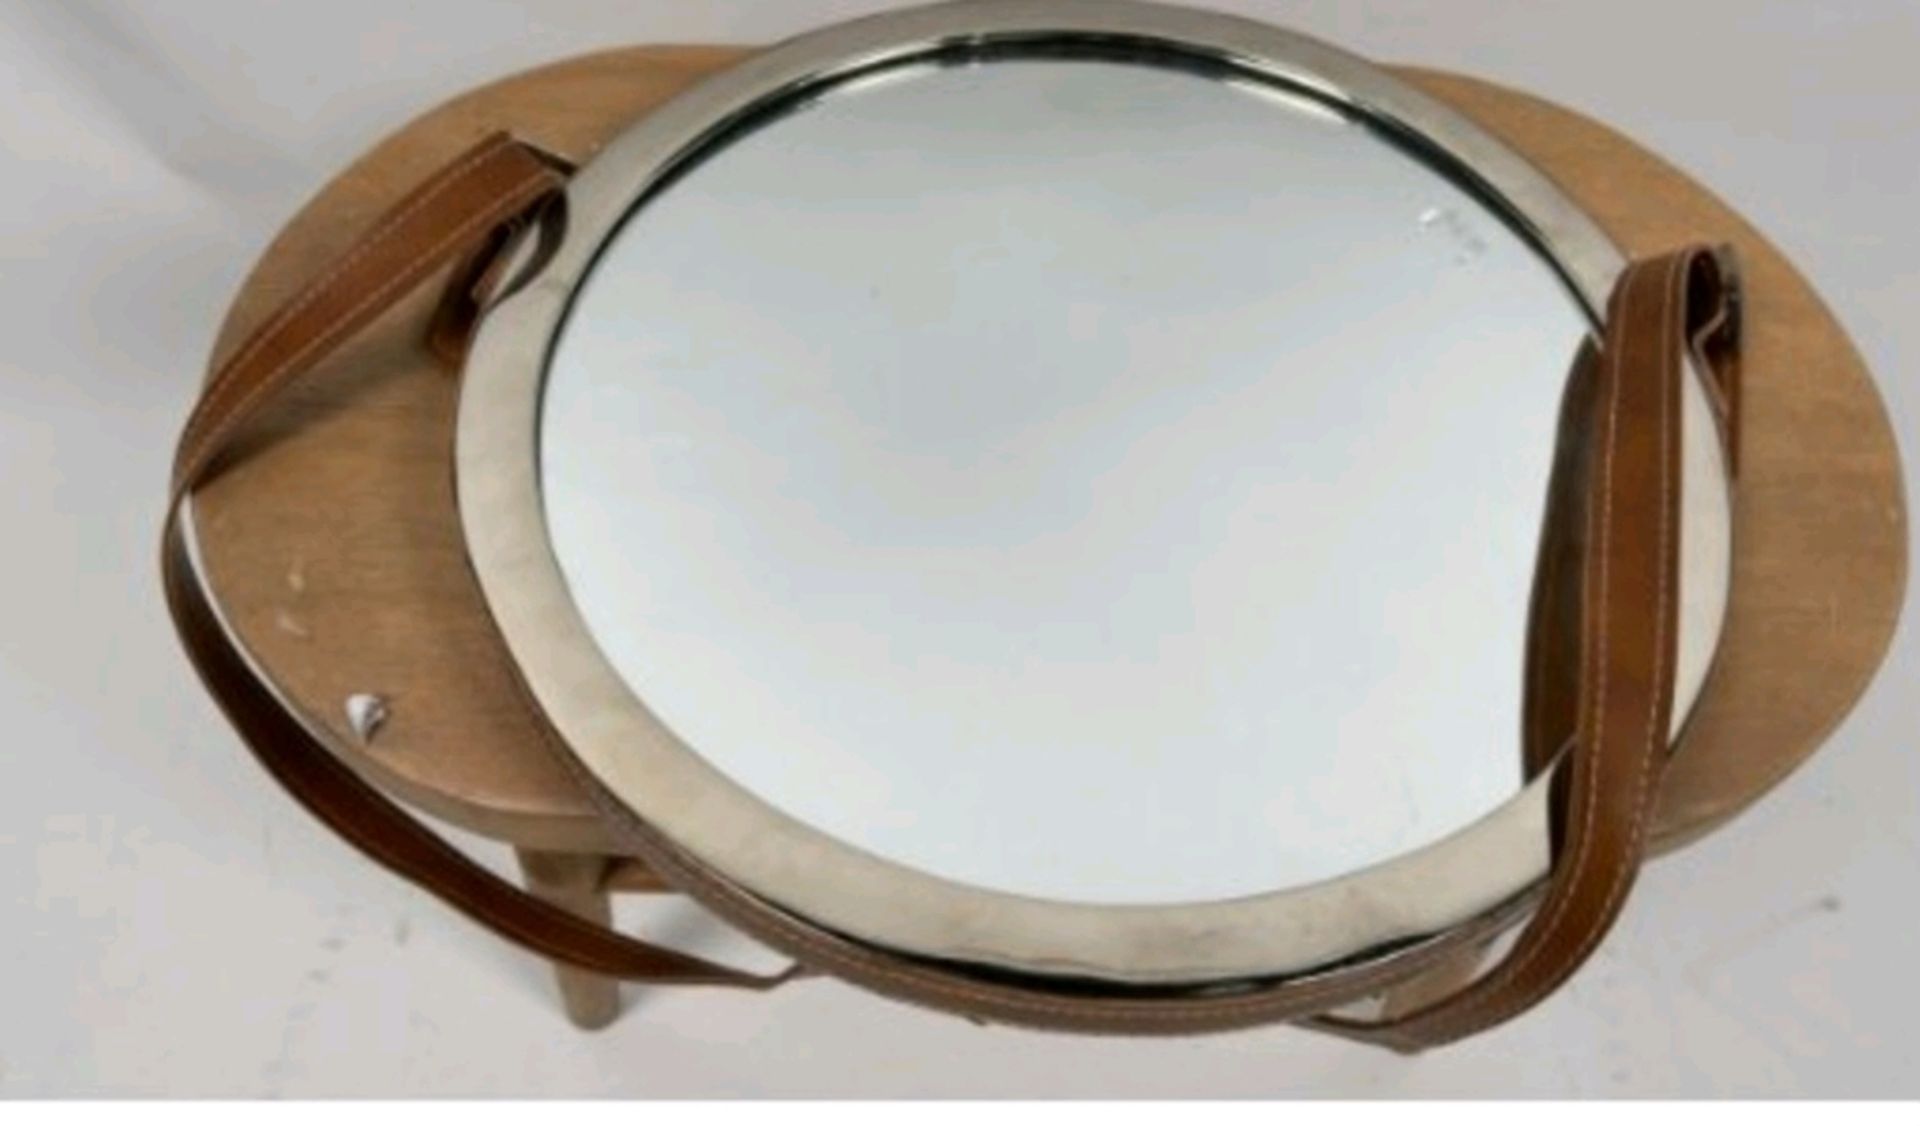 Circular Wall Mirror With Leather Strap - Image 3 of 4